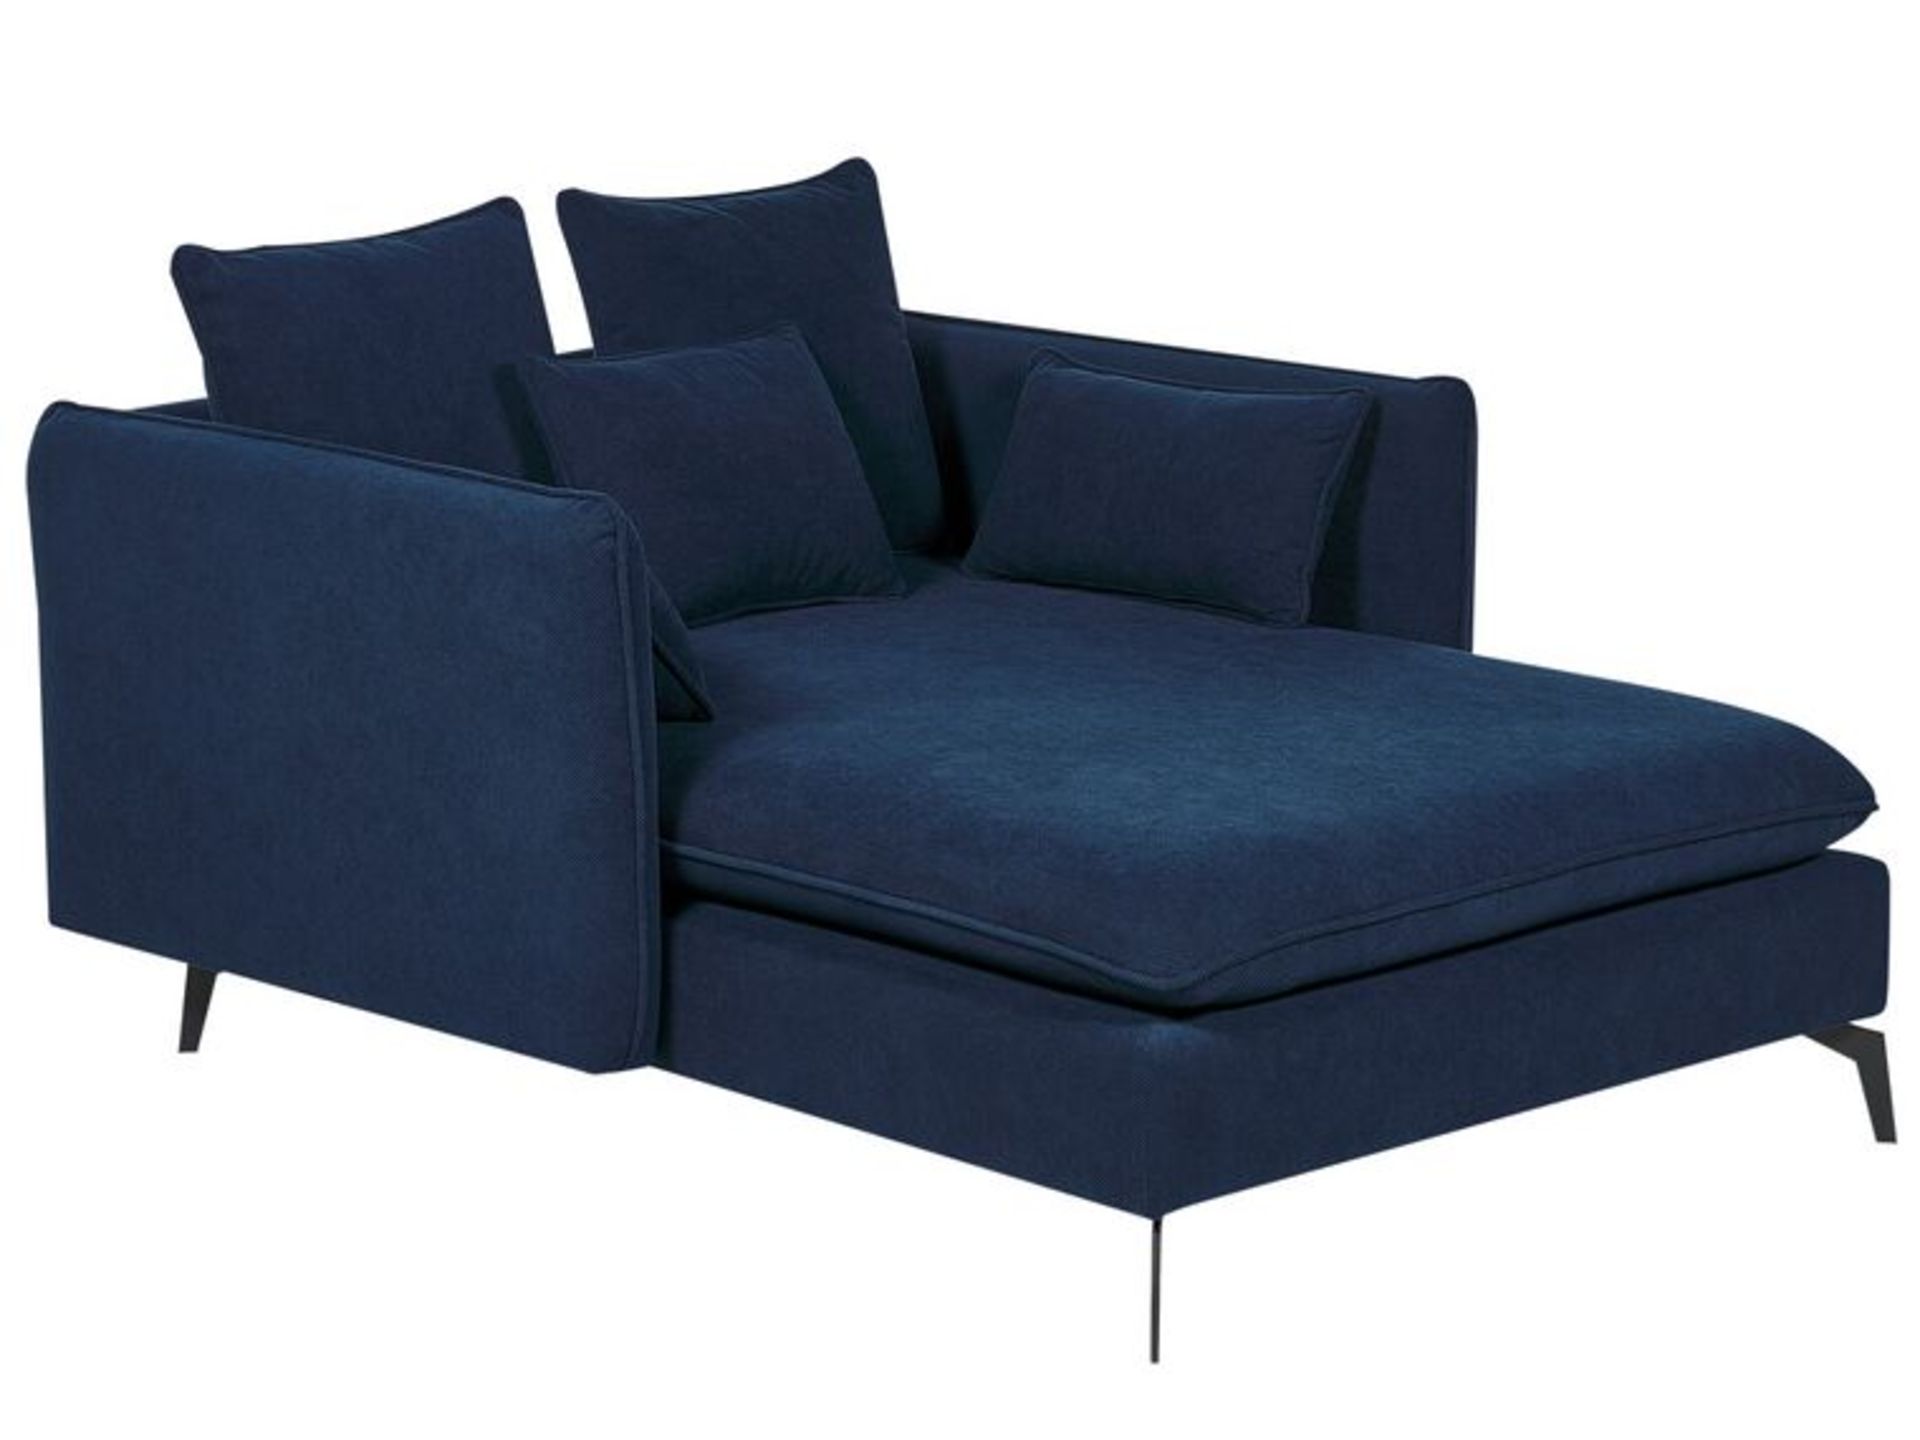 Charmes Fabric Chaise Lounge Blue. - R14. RRP £819.99. Relax in style and comfort in this